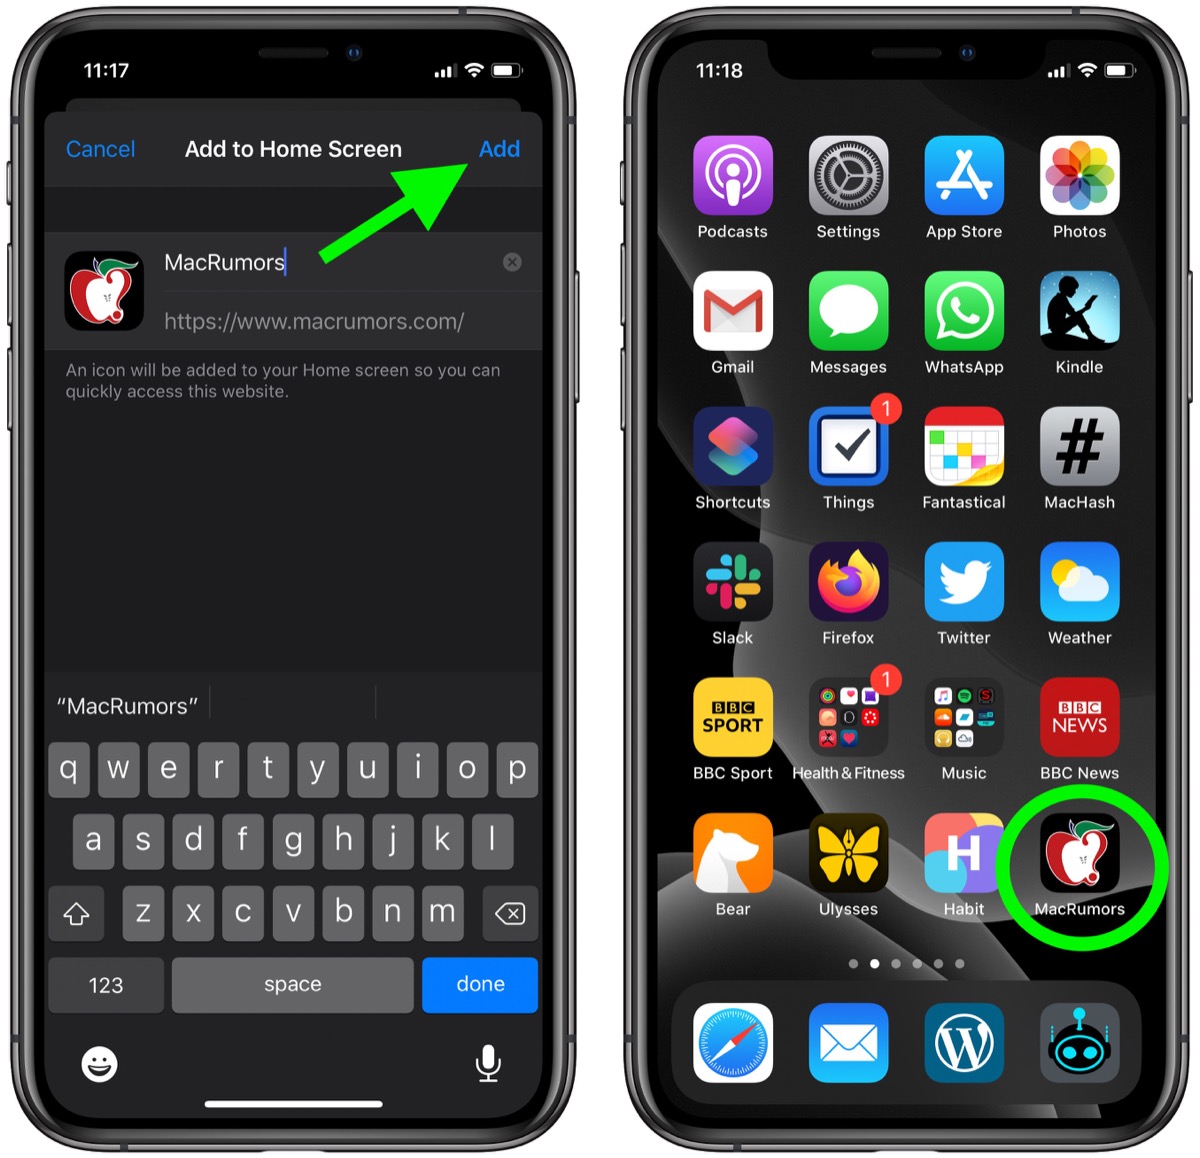 How to put a website on your iphone home screen How To Add A Website Bookmark To Your Home Screen On Iphone And Ipad Macrumors